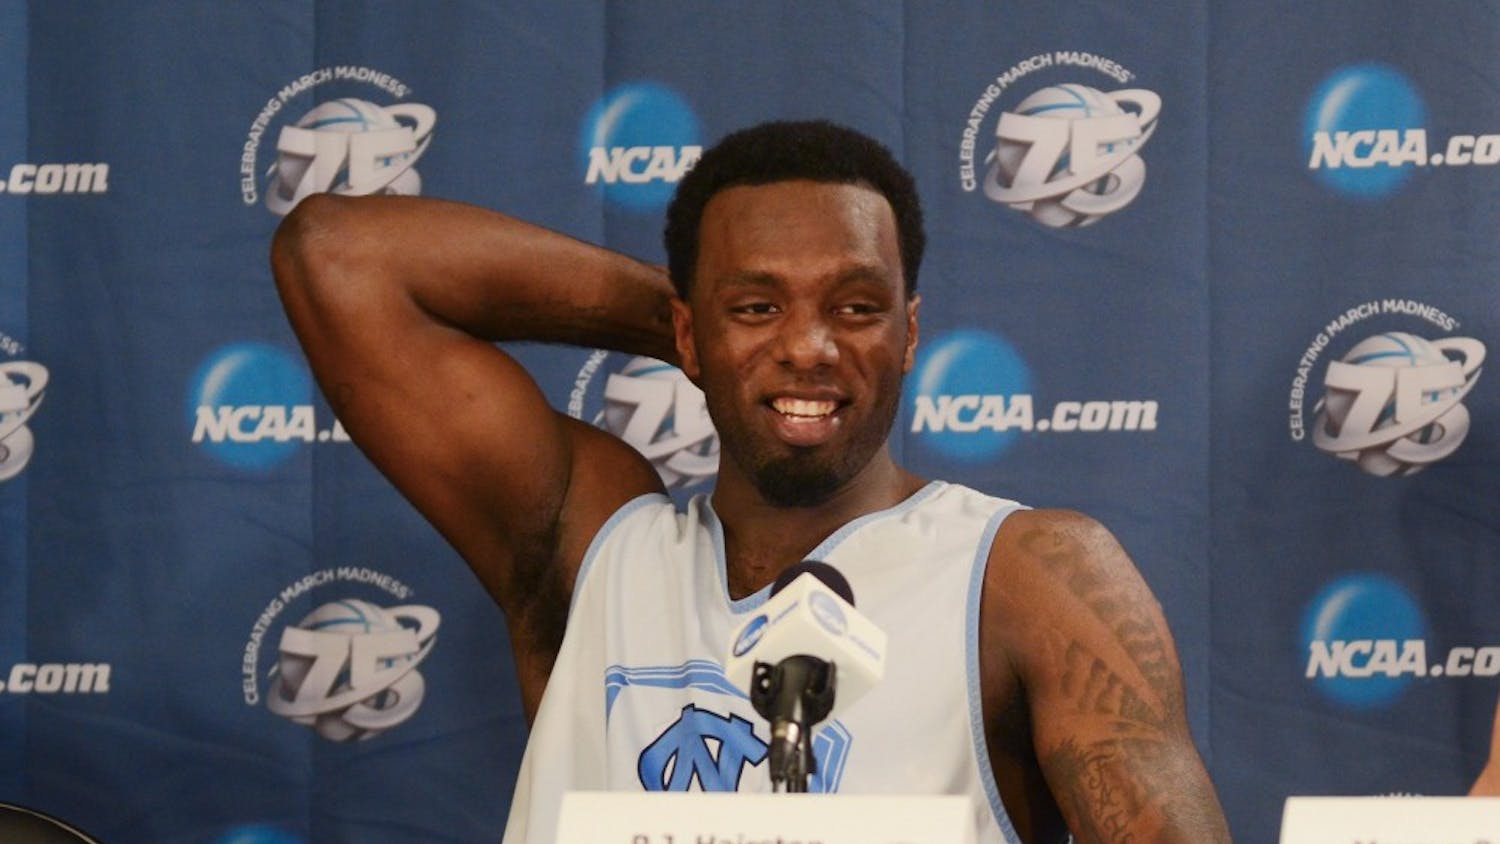 P.J. Hairston speaks to members of the media on March 23rd, 2013 in the Sprint Center in Kansas City, Missouri.